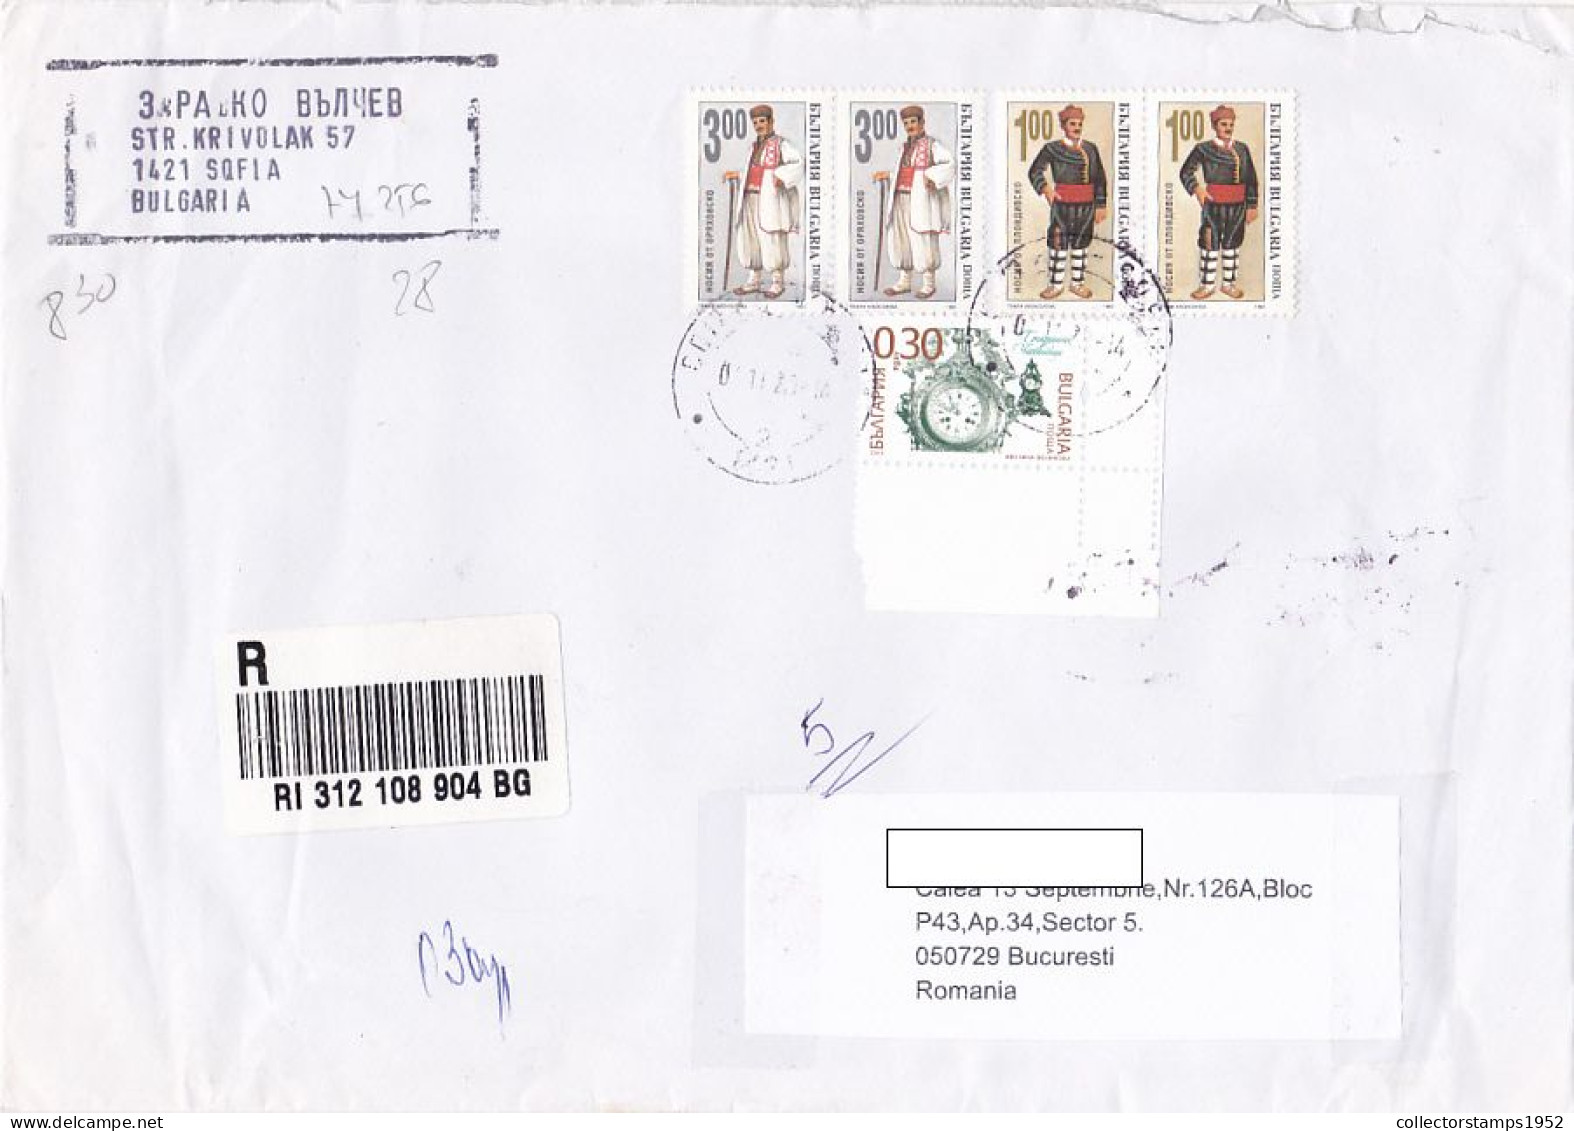 FOLKLORE COSTUMES, CLOCK, FINE STAMPS ON REGISTERED COVER, CUSTOM DUTY, 2020, BULGARIA - Covers & Documents